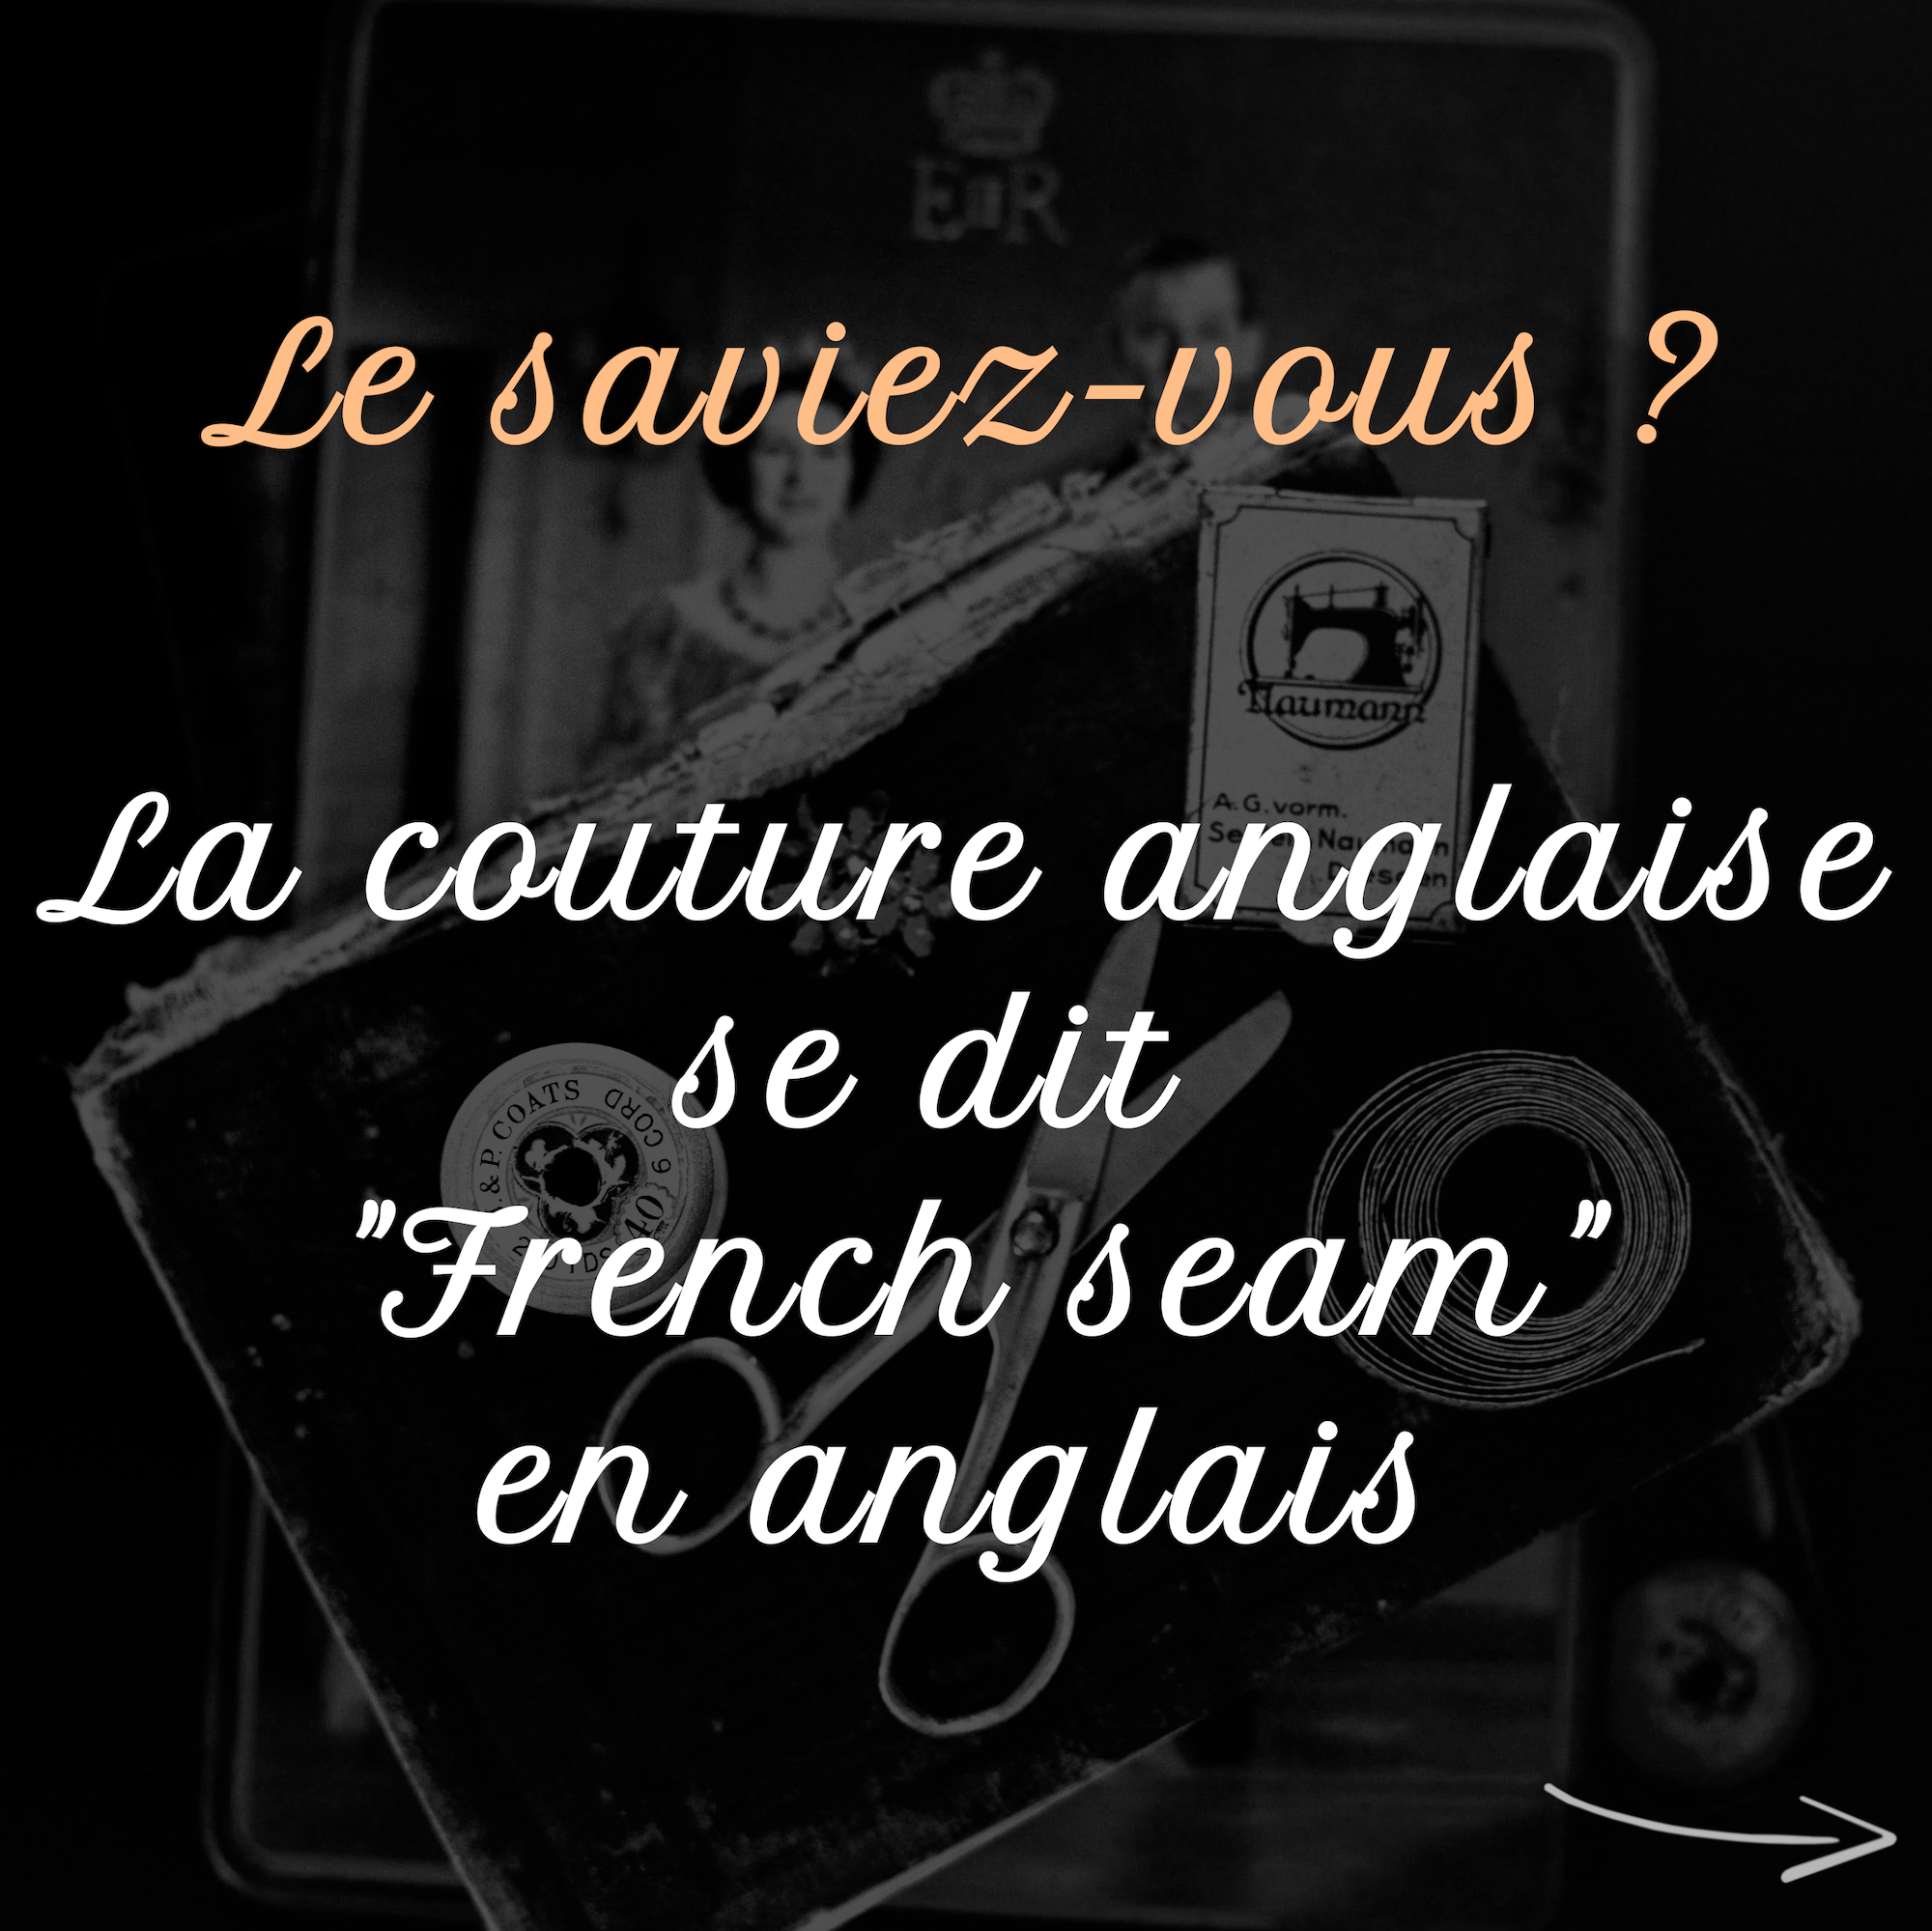 Le saviez-vous : Couture anglaise / French seam